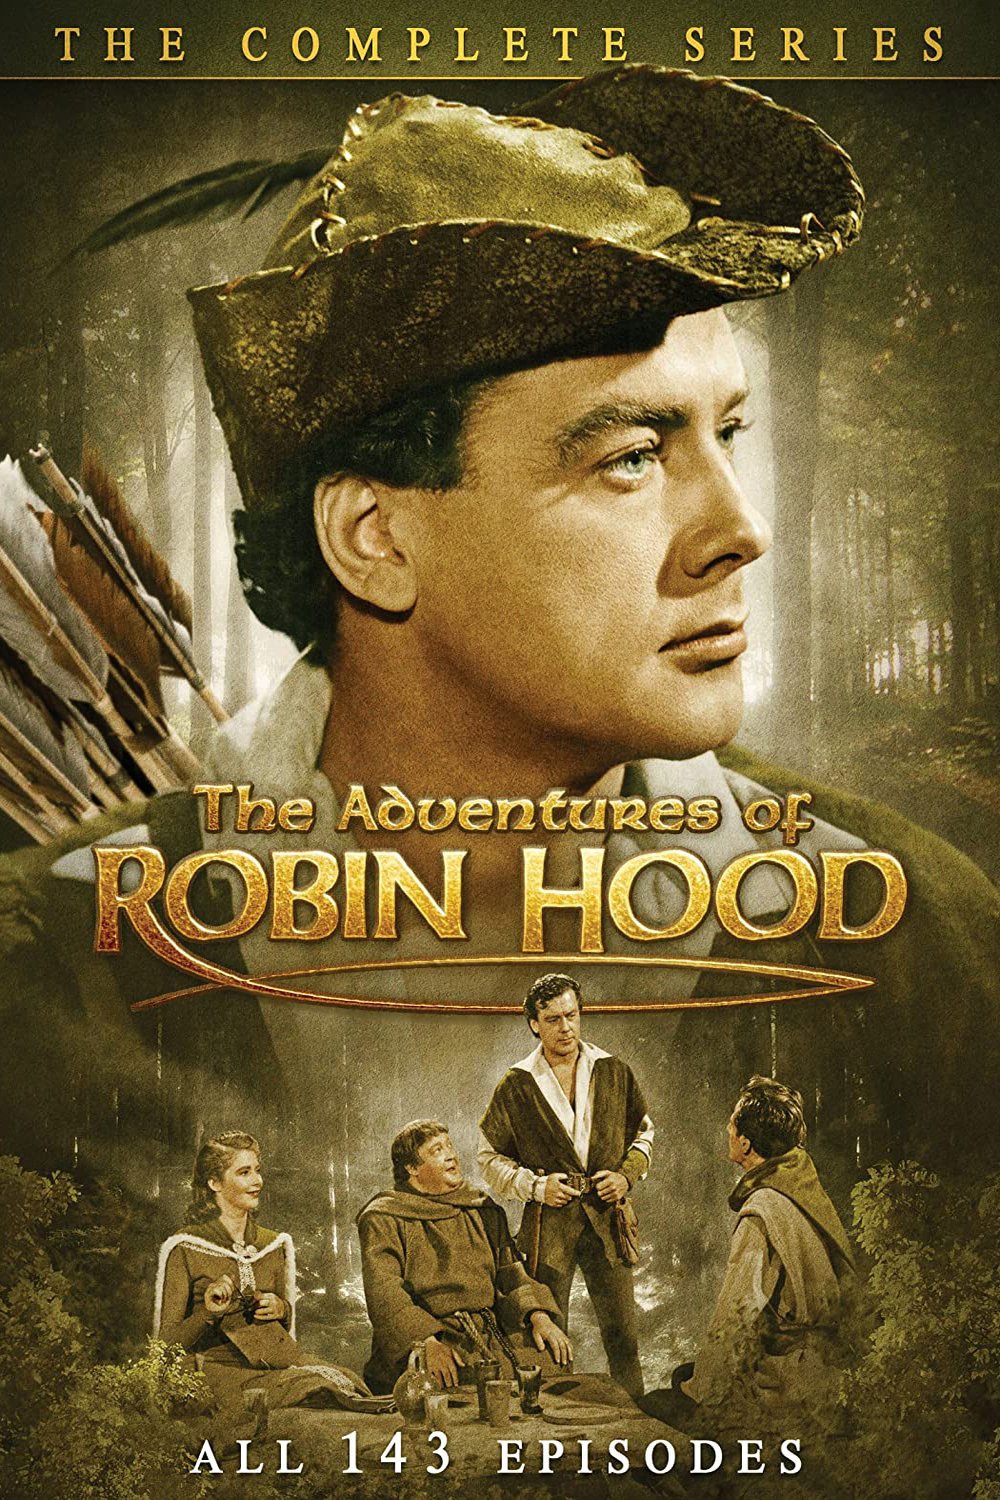 Poster of the movie The Adventures of Robin Hood